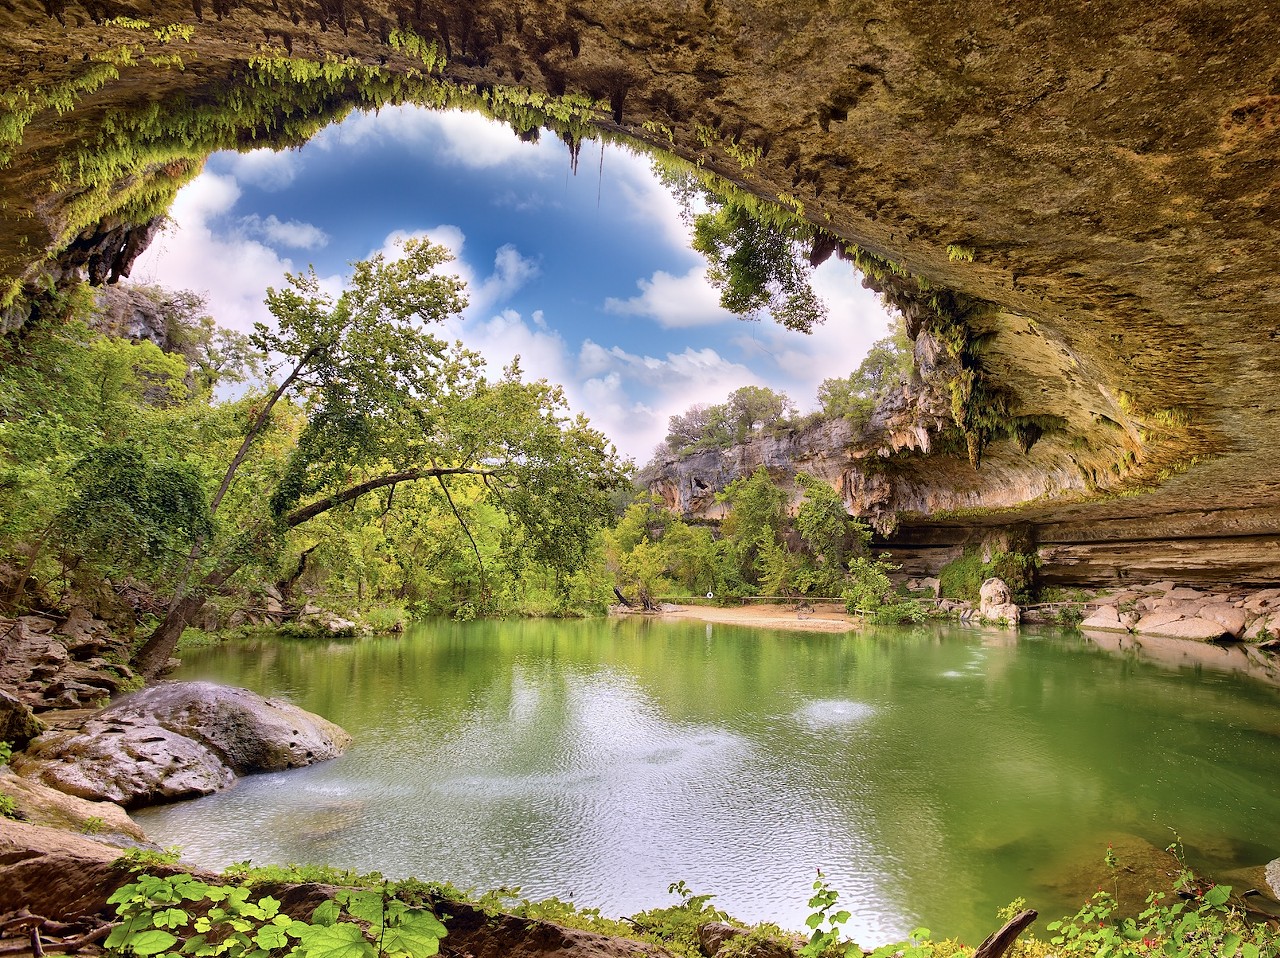 Dripping Springs
About a 1.5 hour drive north of San Antonio
Known as the "gateway to the Hill Country," Dripping Springs has something for everybody. This quintessential Texas town is home to natural wonders like the Hamilton Pool and features a vibrant main street full of shops and locally-owned restaurants. Dripping Springs also has plenty of places to get boozy with wineries, distilleries and breweries in the area.